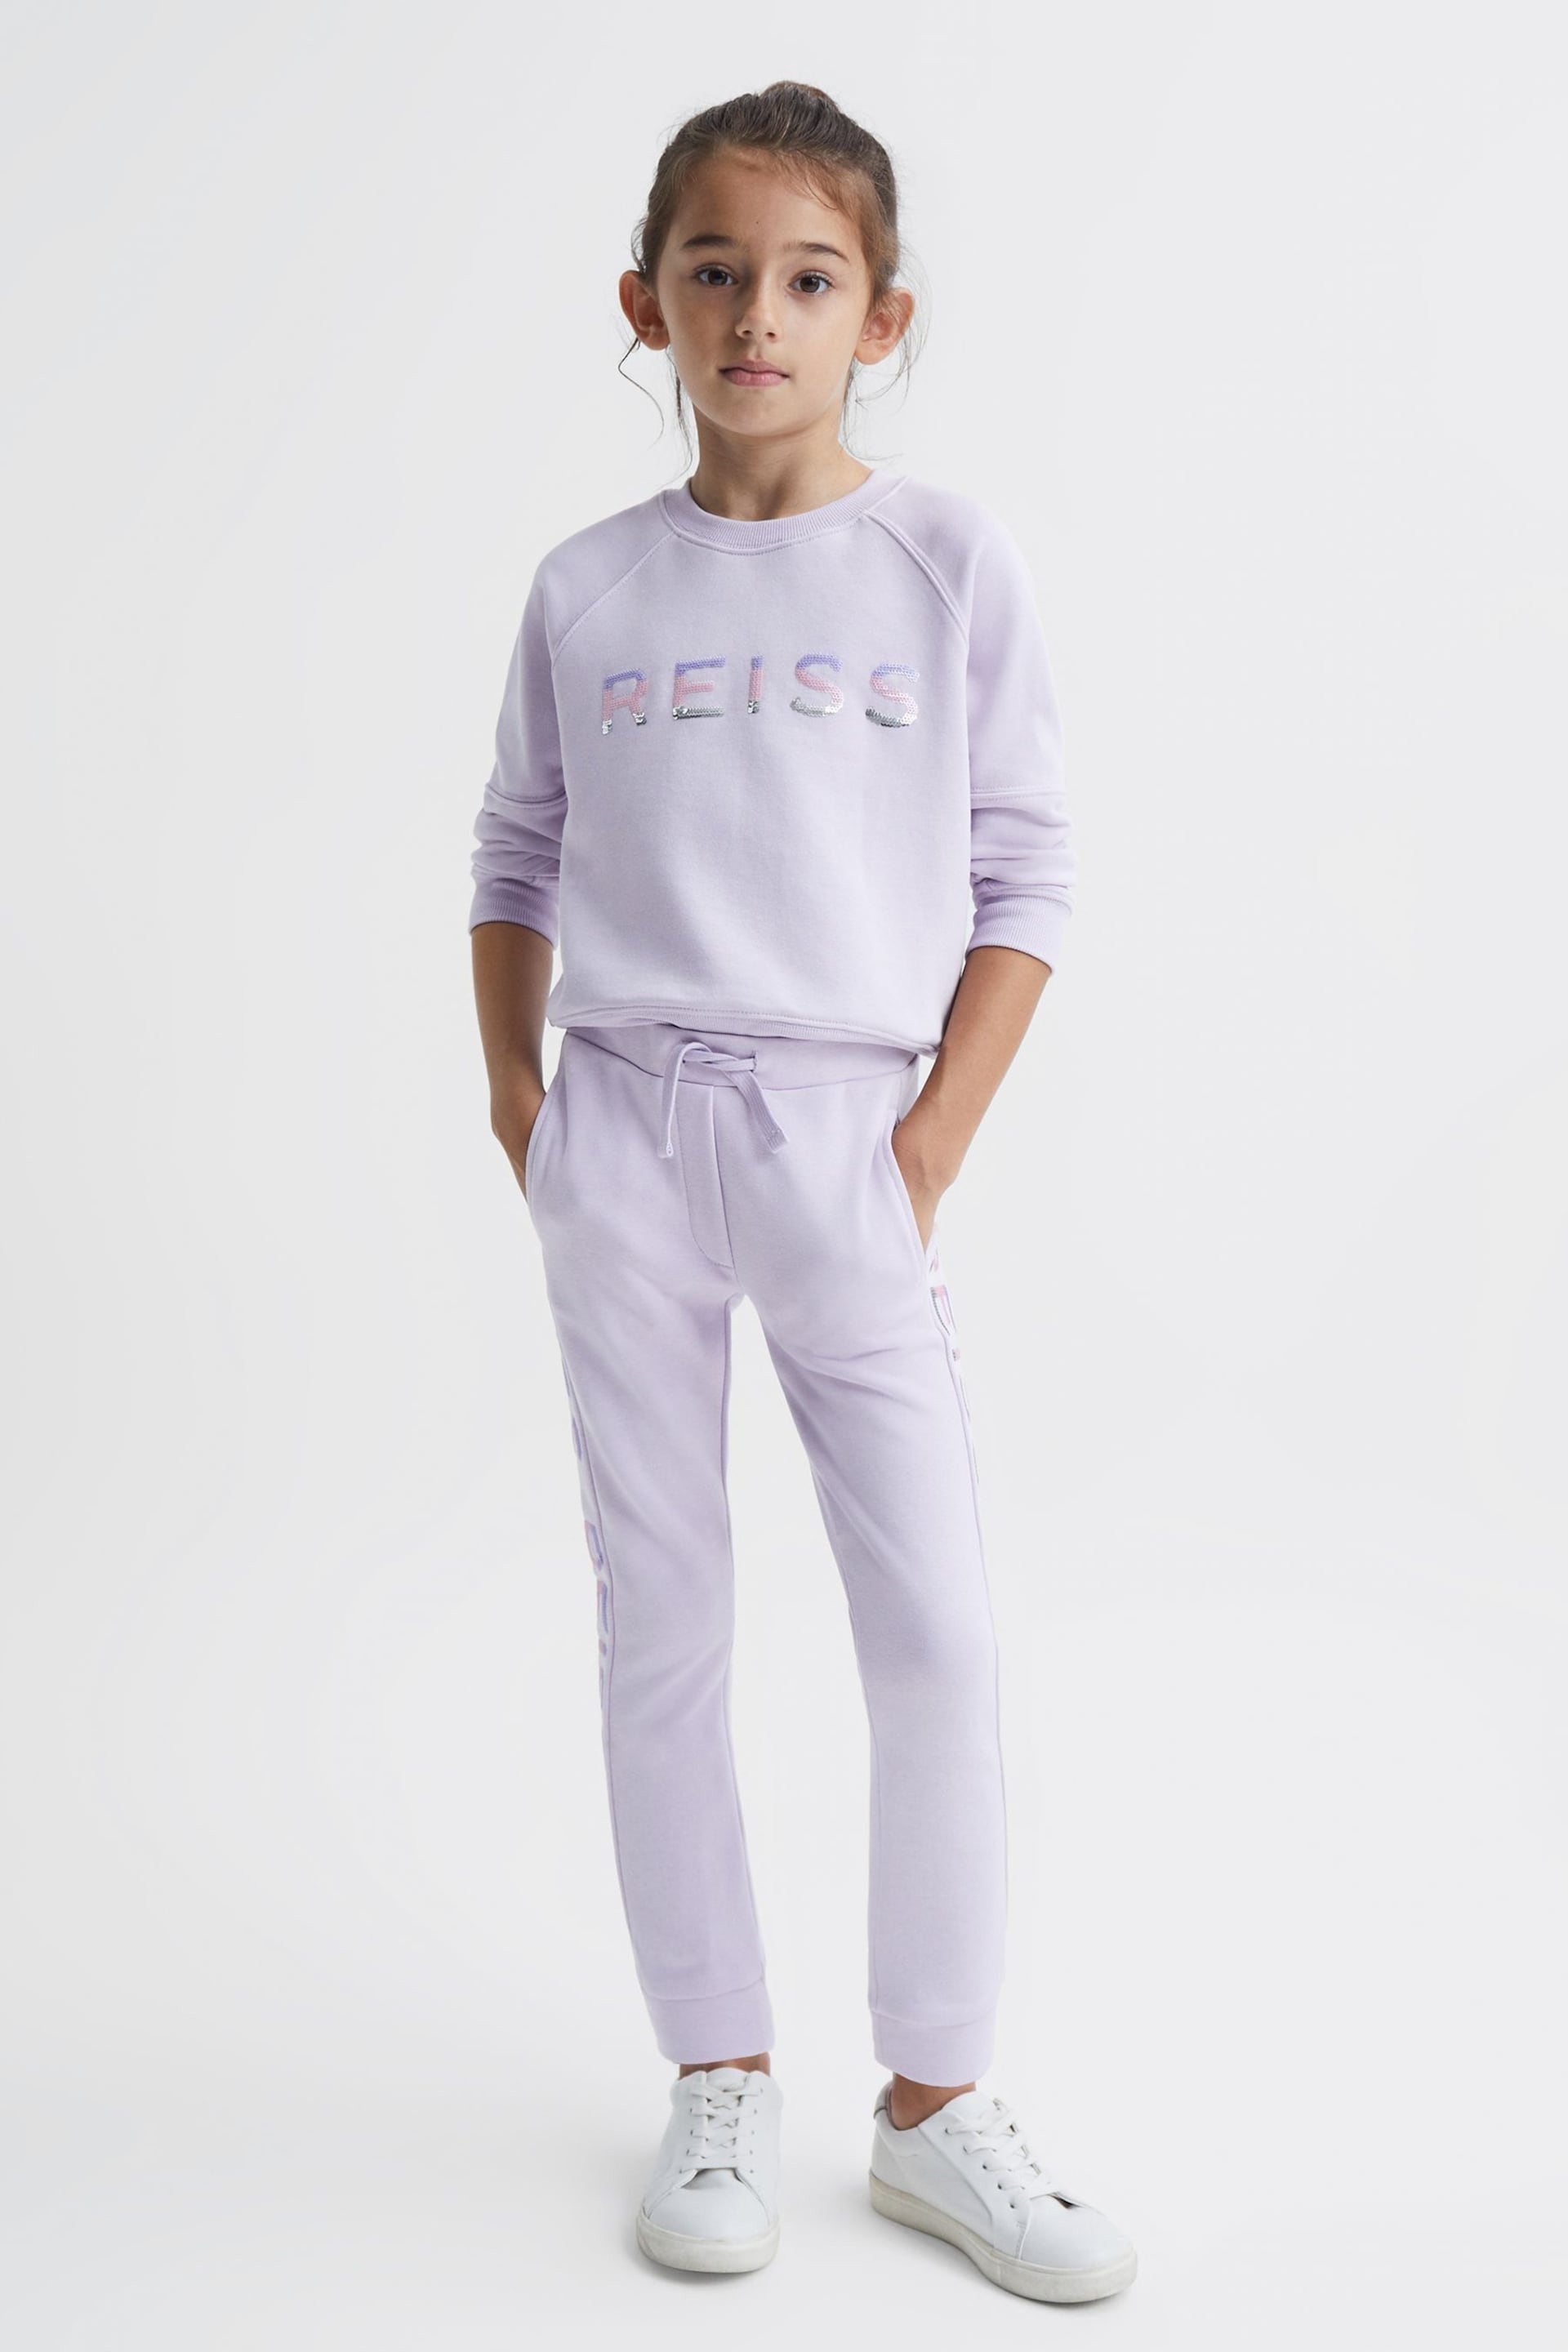 Reiss Lilac Bryony Junior Sequin Crew Neck Jumper - Image 3 of 7